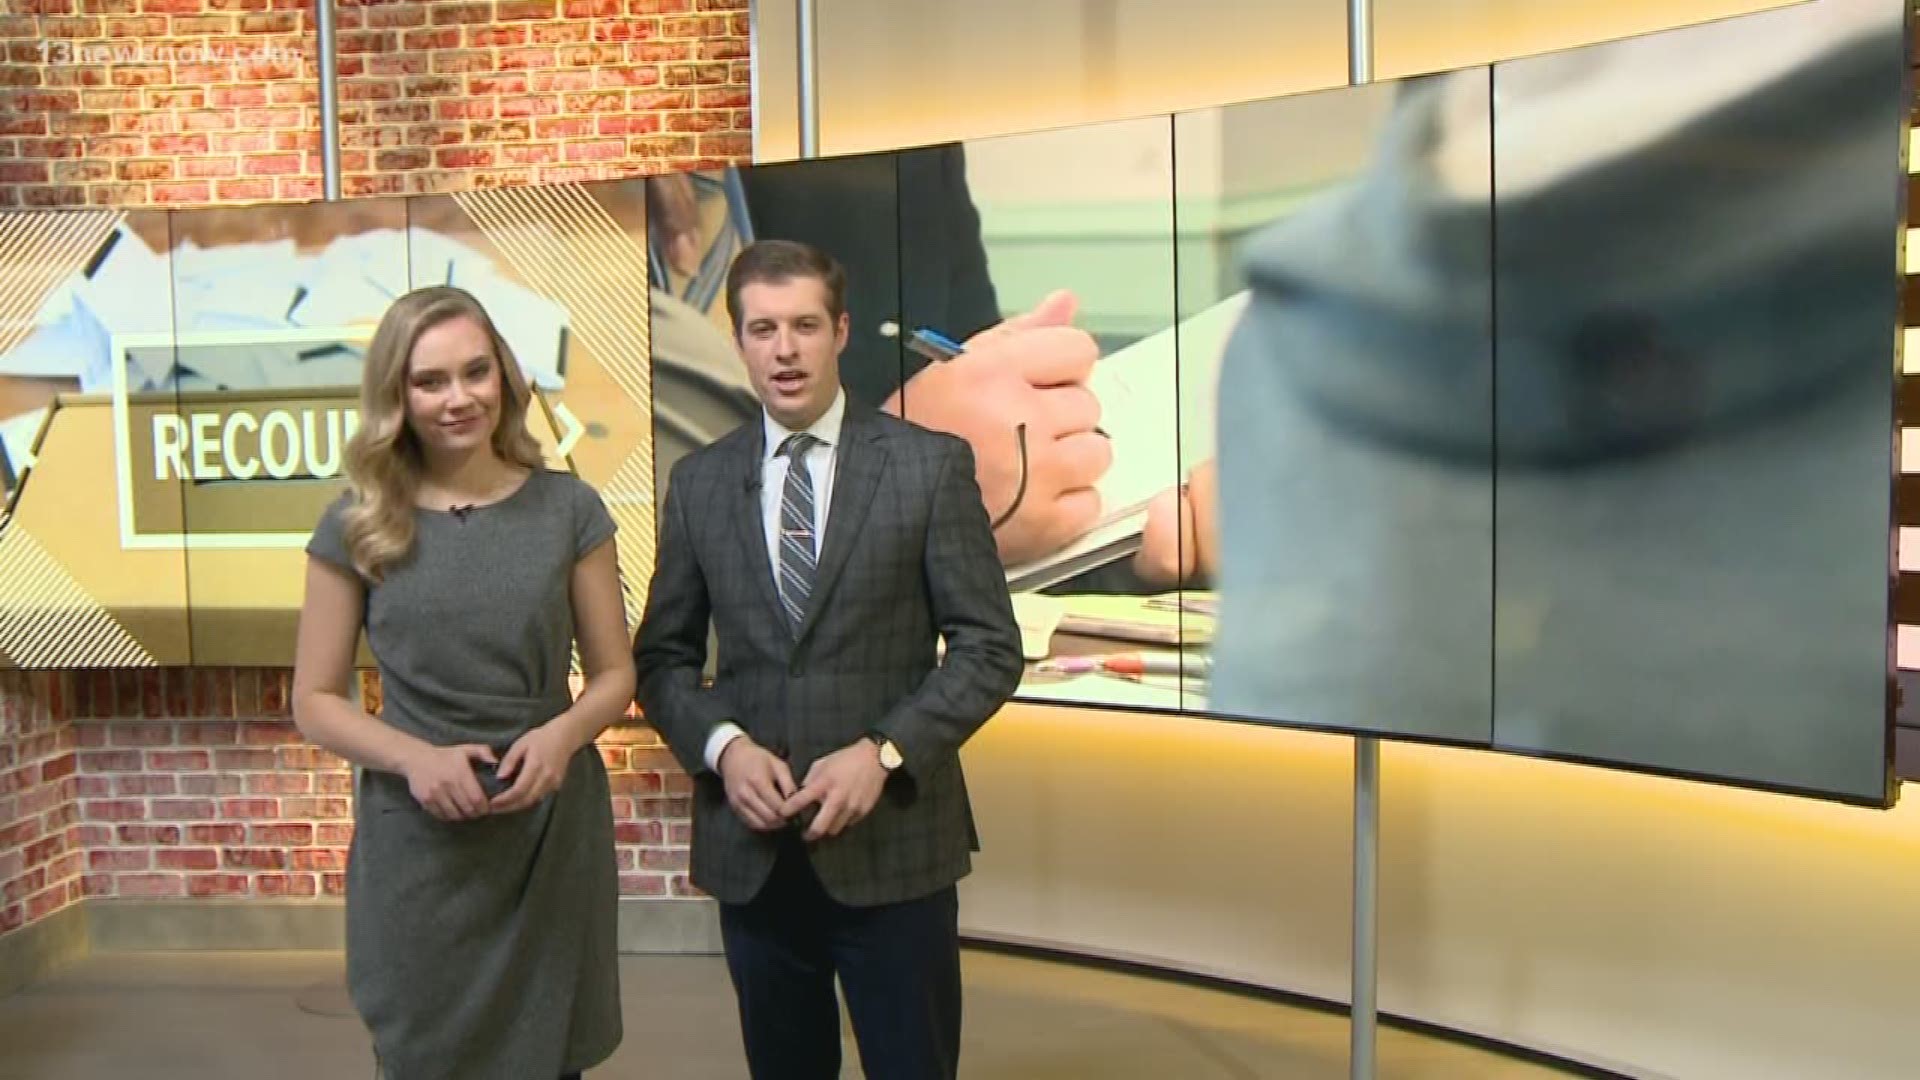 13News Now top headlines at noon with Kristina Robinson and Dan Kennedy for December 17.